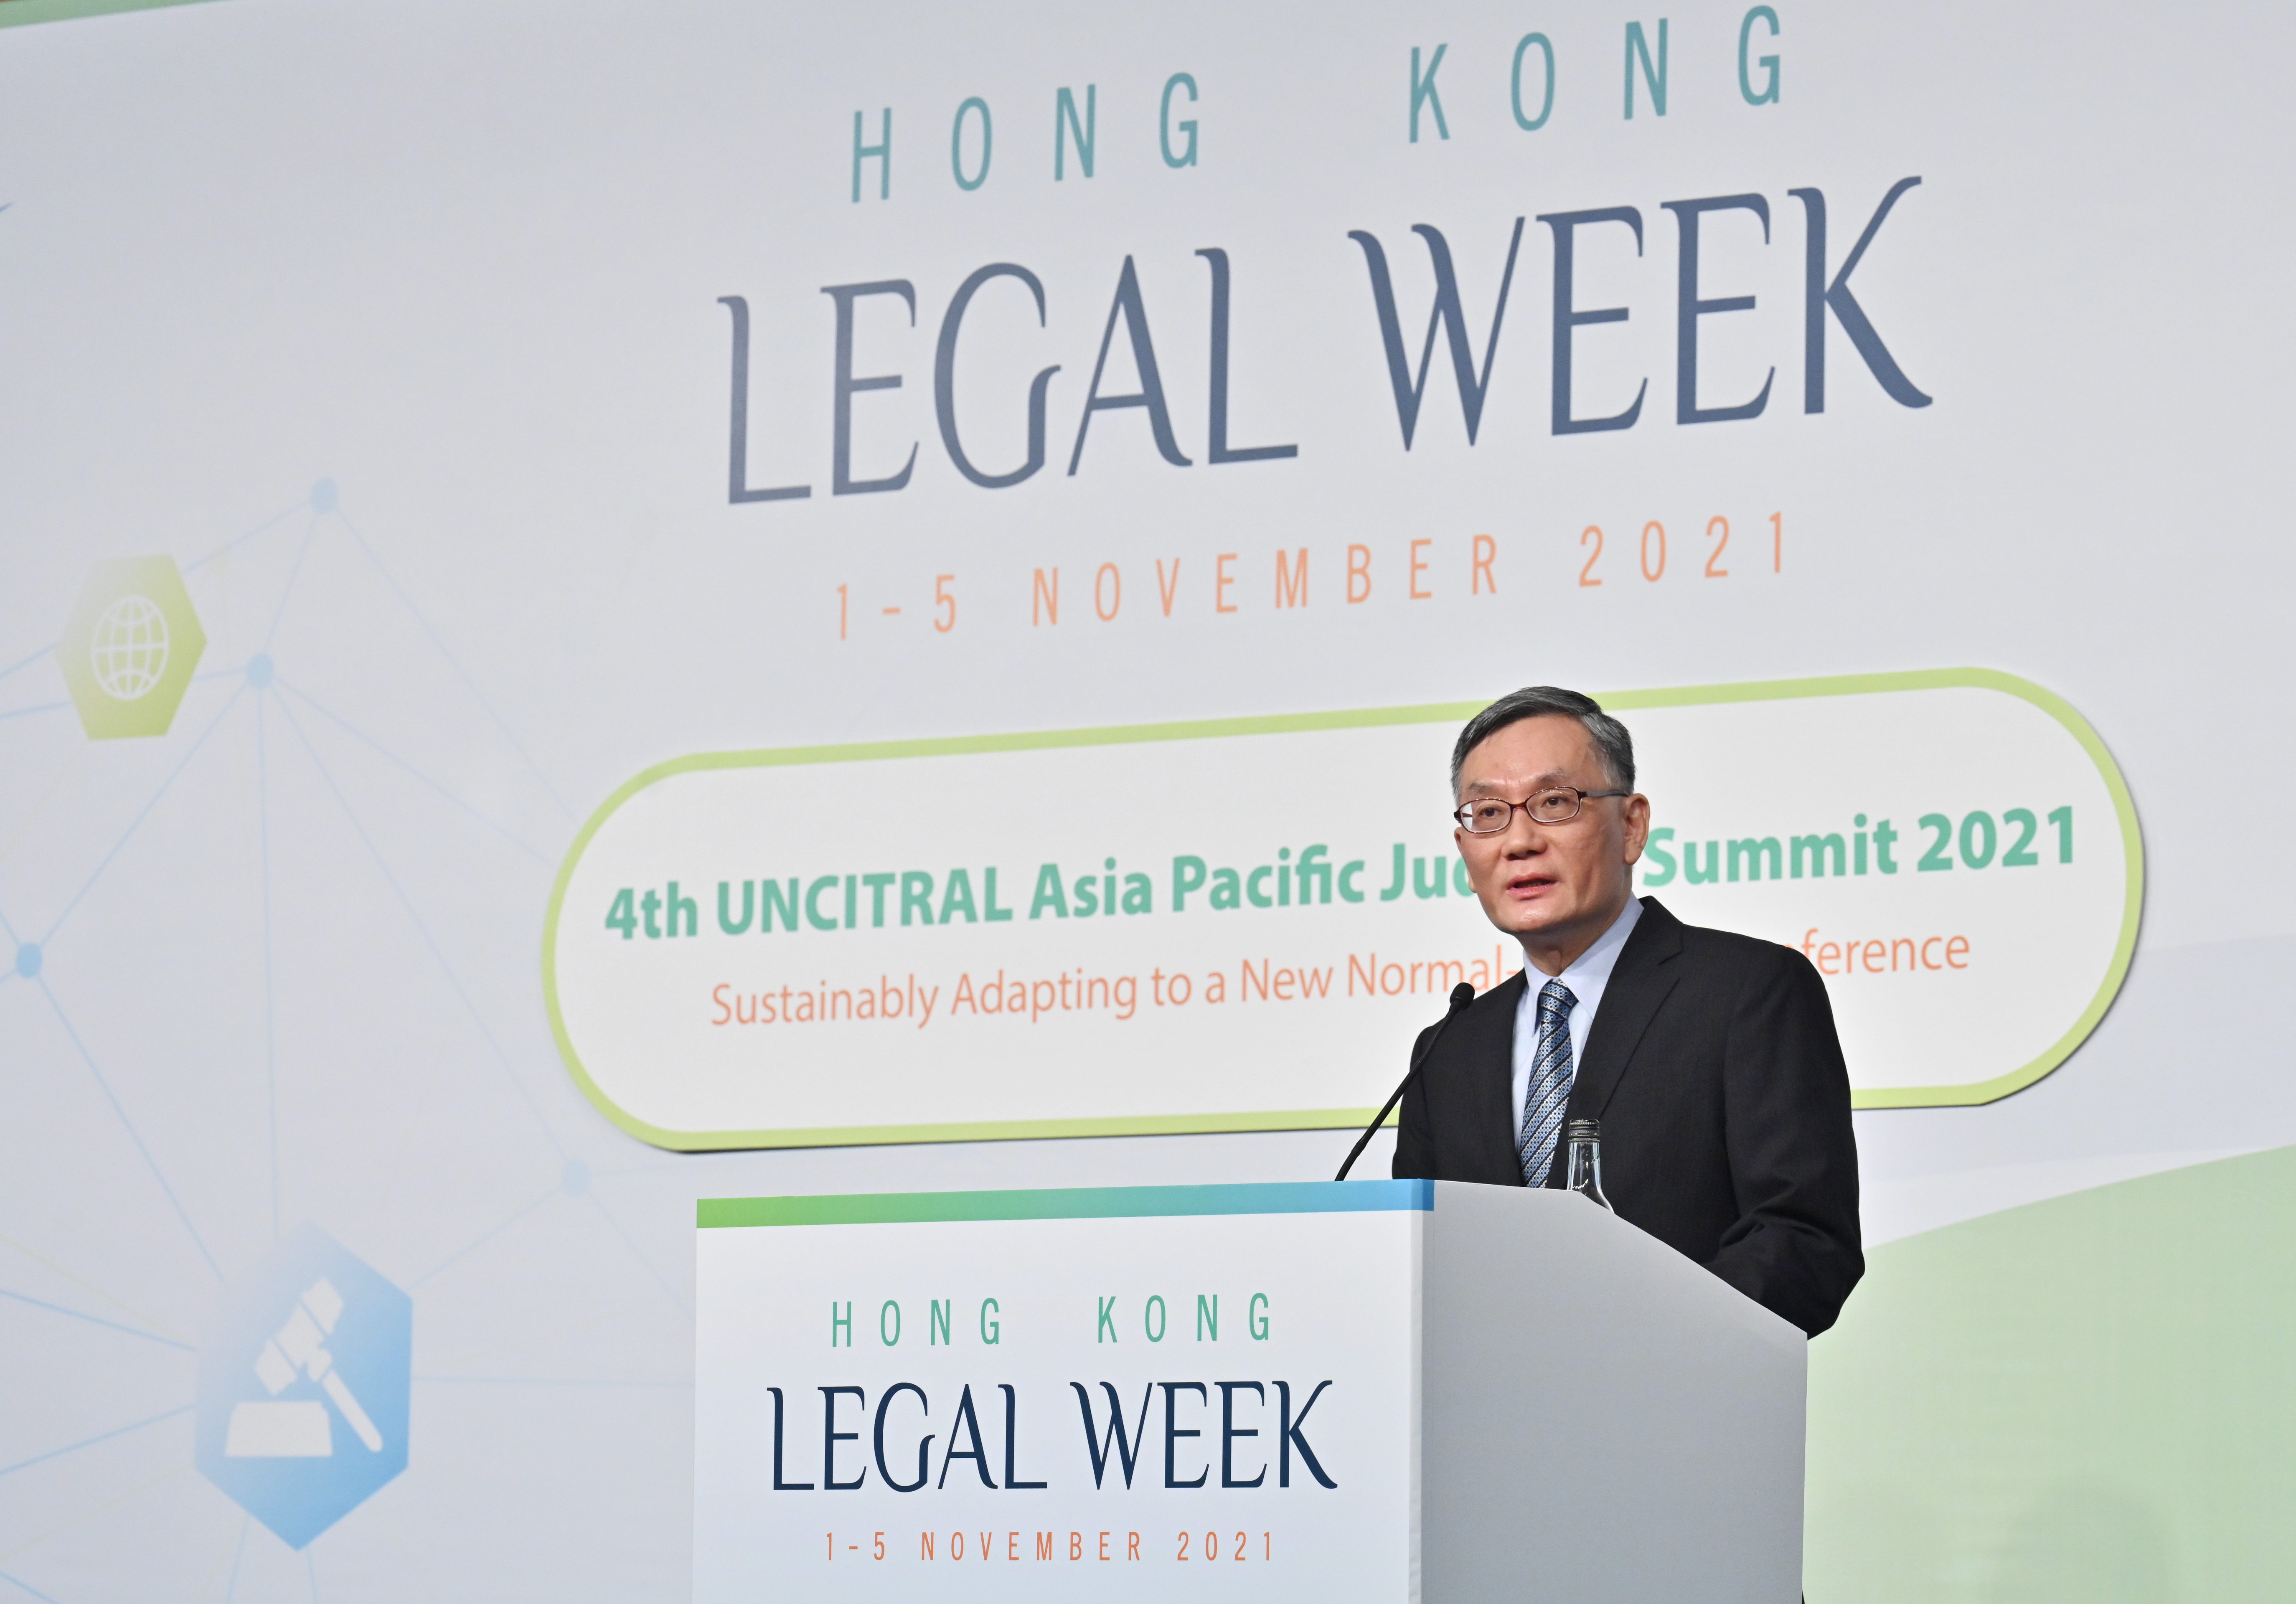 The Chief Justice of the Court of Final Appeal, Mr Andrew Cheung Kui-nung, speaks at the 4th UNCITRAL Asia Pacific Judicial Summit under Hong Kong Legal Week 2021 today (November 1).